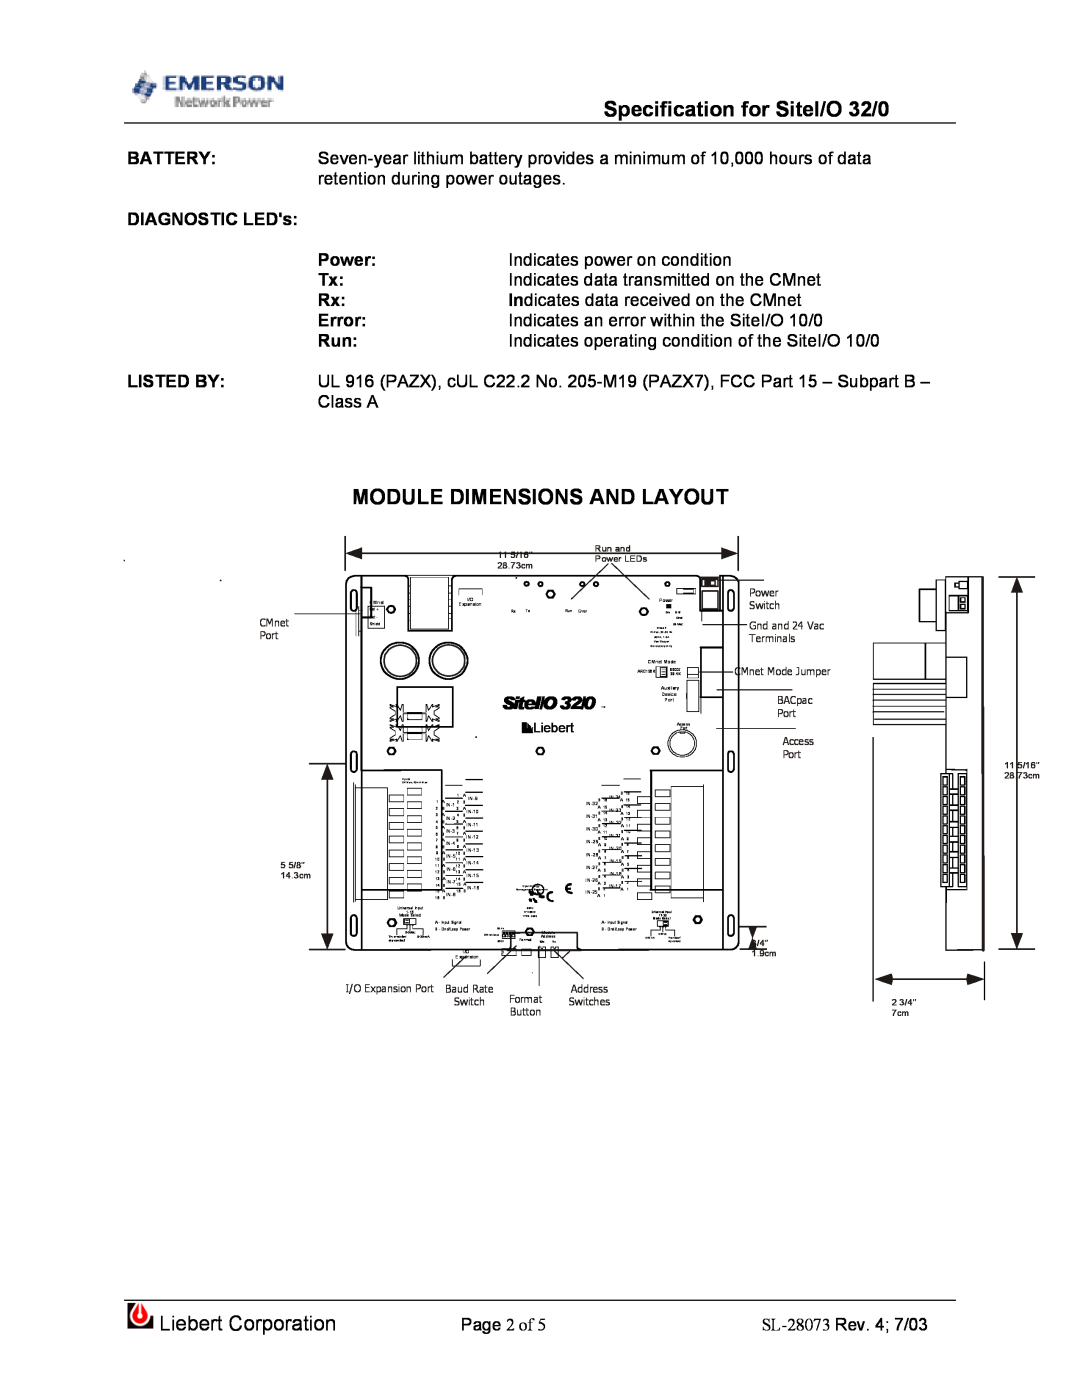 Emerson dimensions Module Dimensions And Layout, Specification for SiteI/O 32/0, Liebert Corporation, DIAGNOSTIC LEDs 